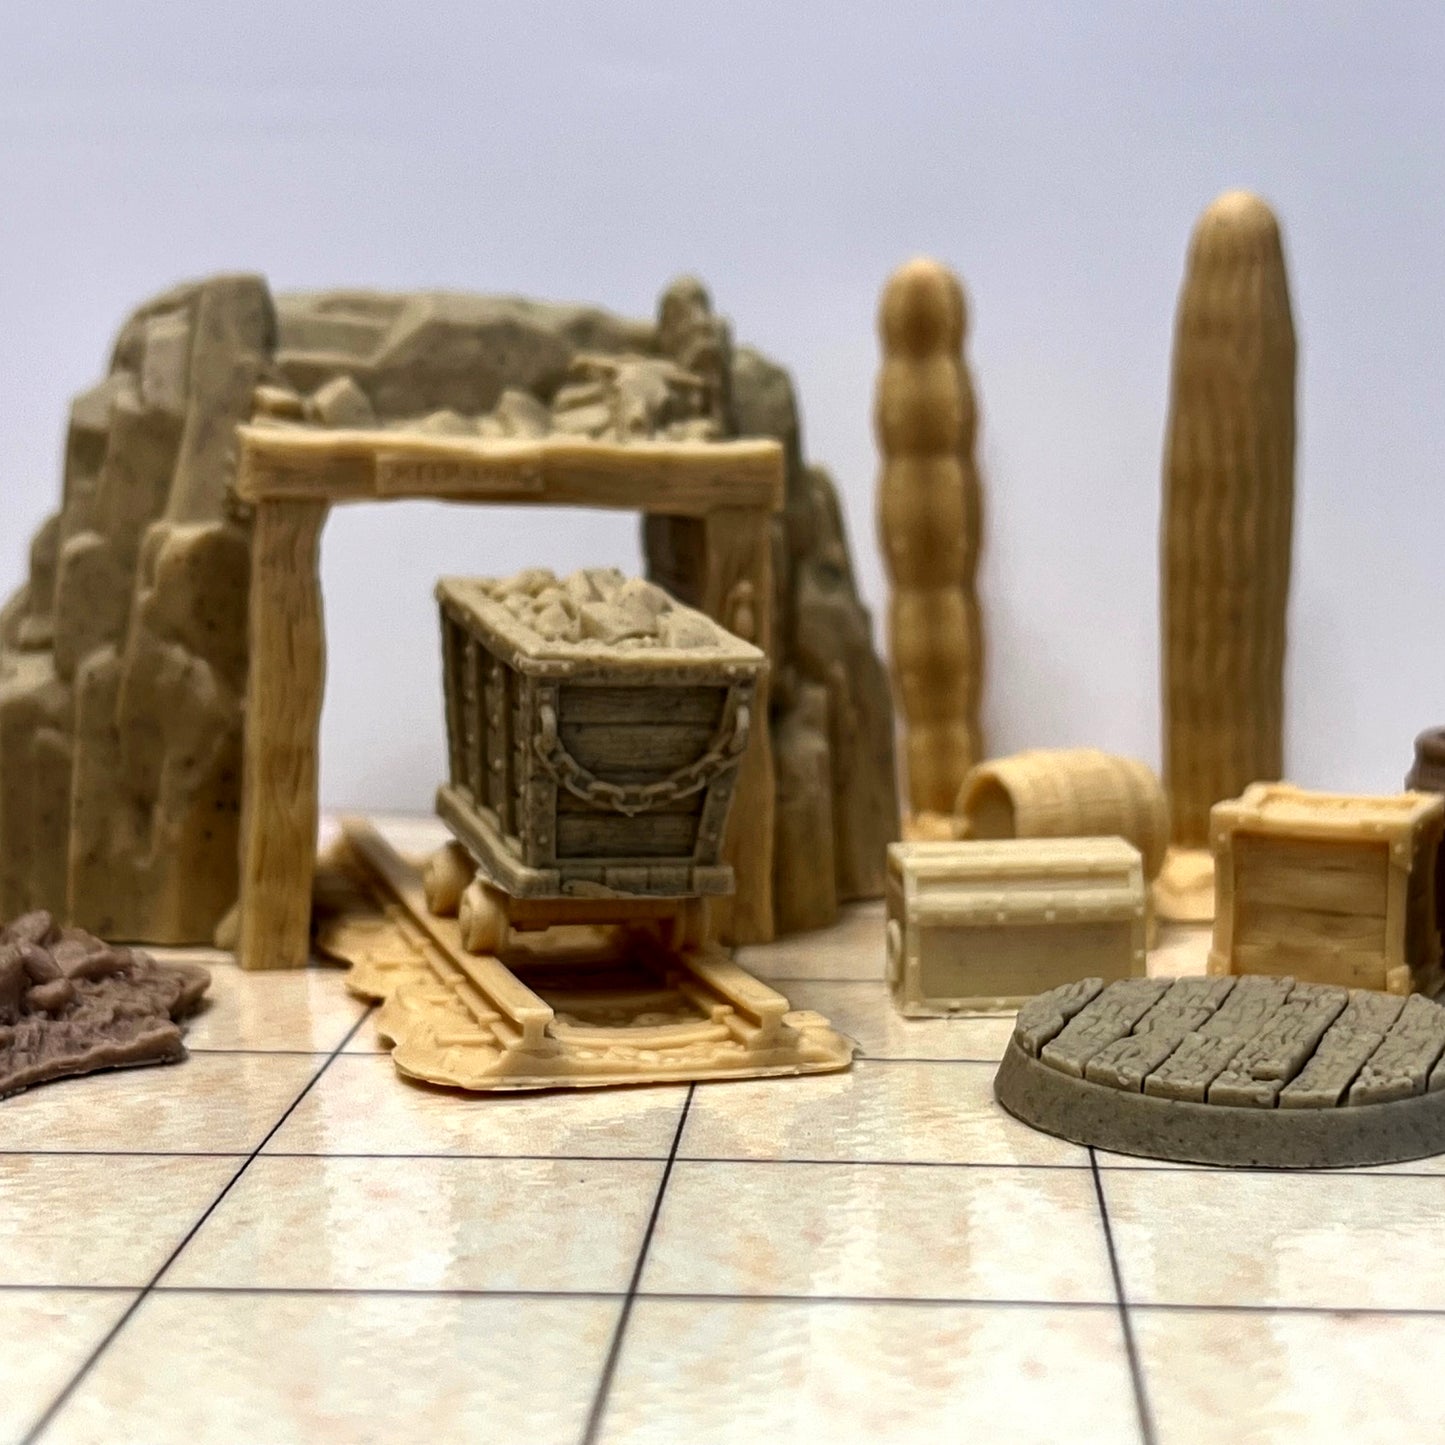 Gold mine scatter terrain for TTRPG, DND role playing games